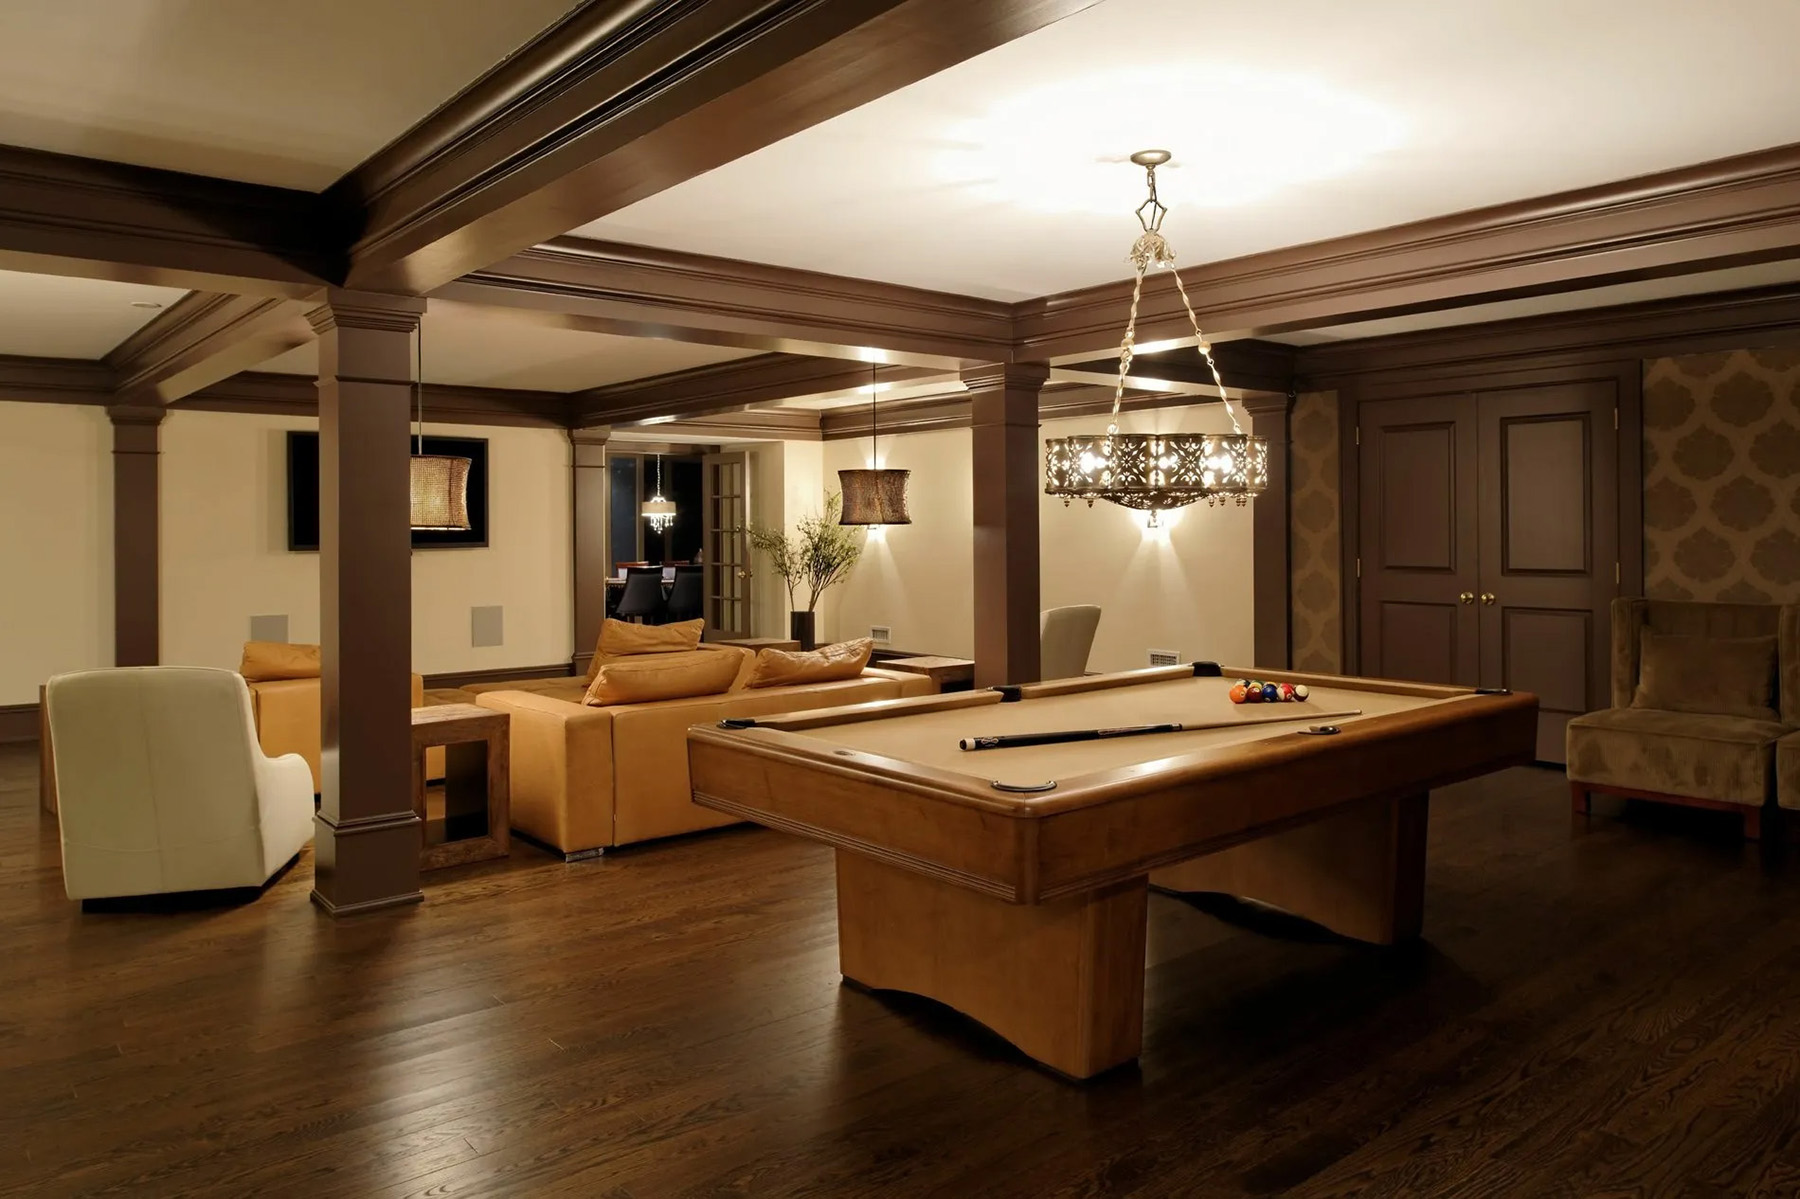 Wood pool table with tan felt. Wood floors with columns and ceiling beams.